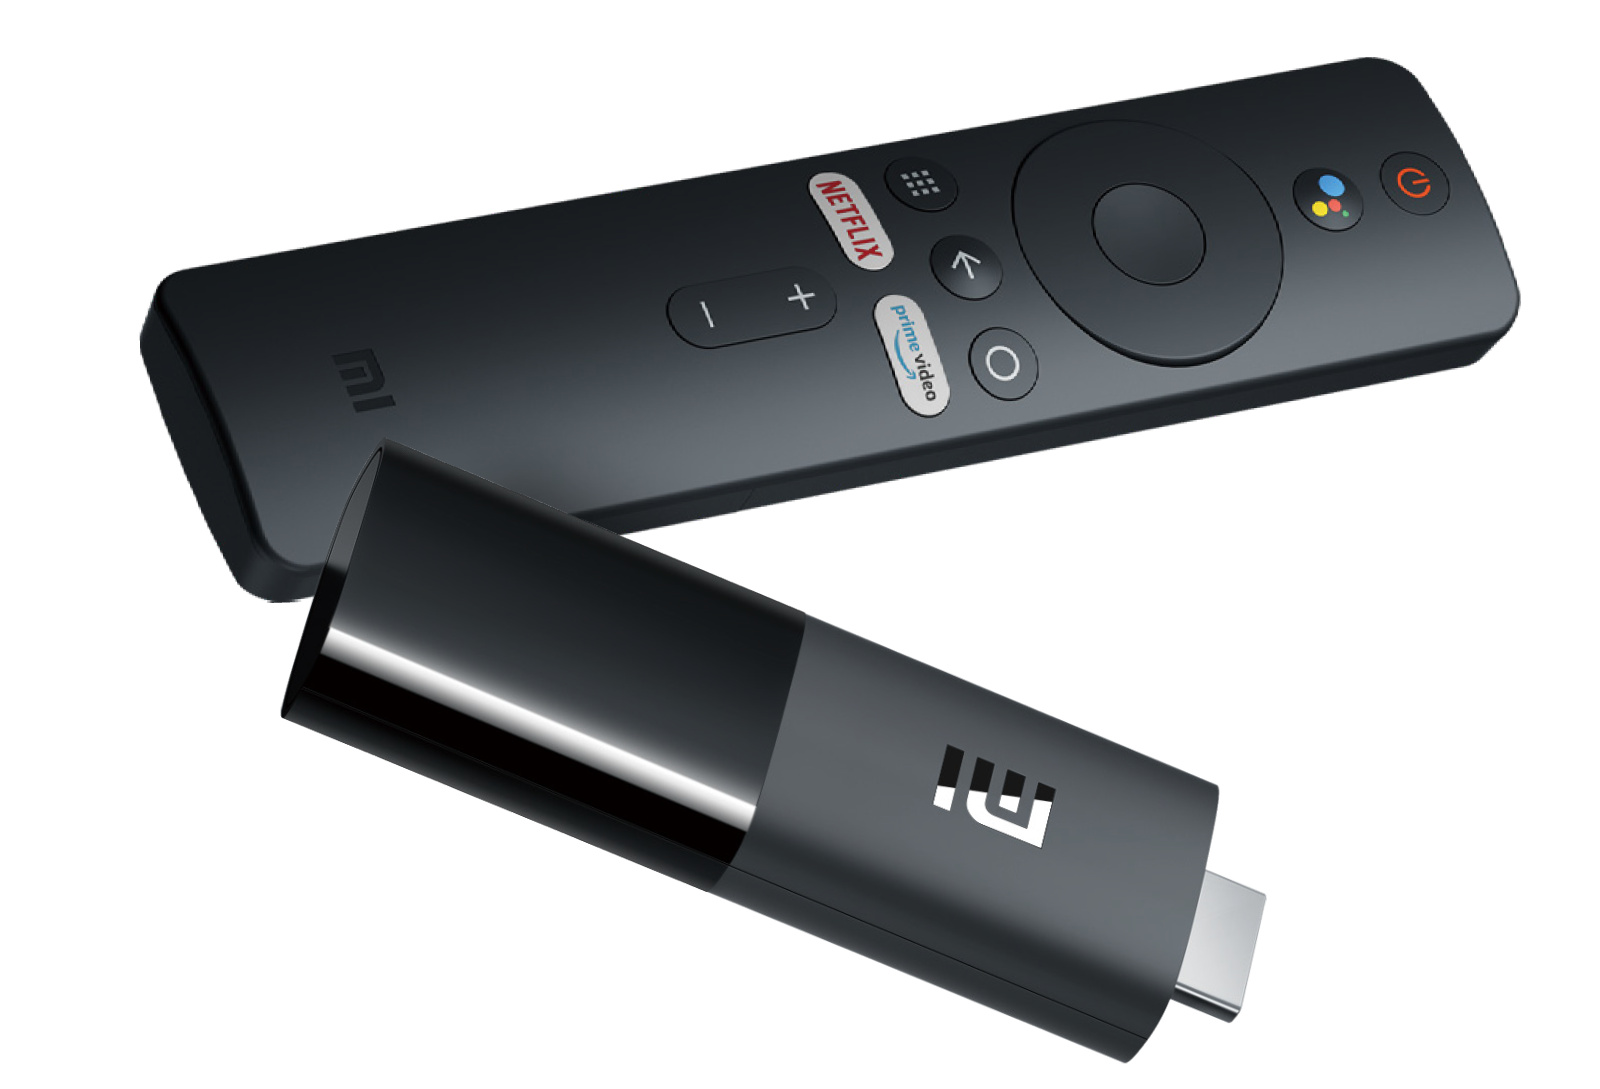  dives into Android TV dongles with a 1080p-capable Mi TV Stick .